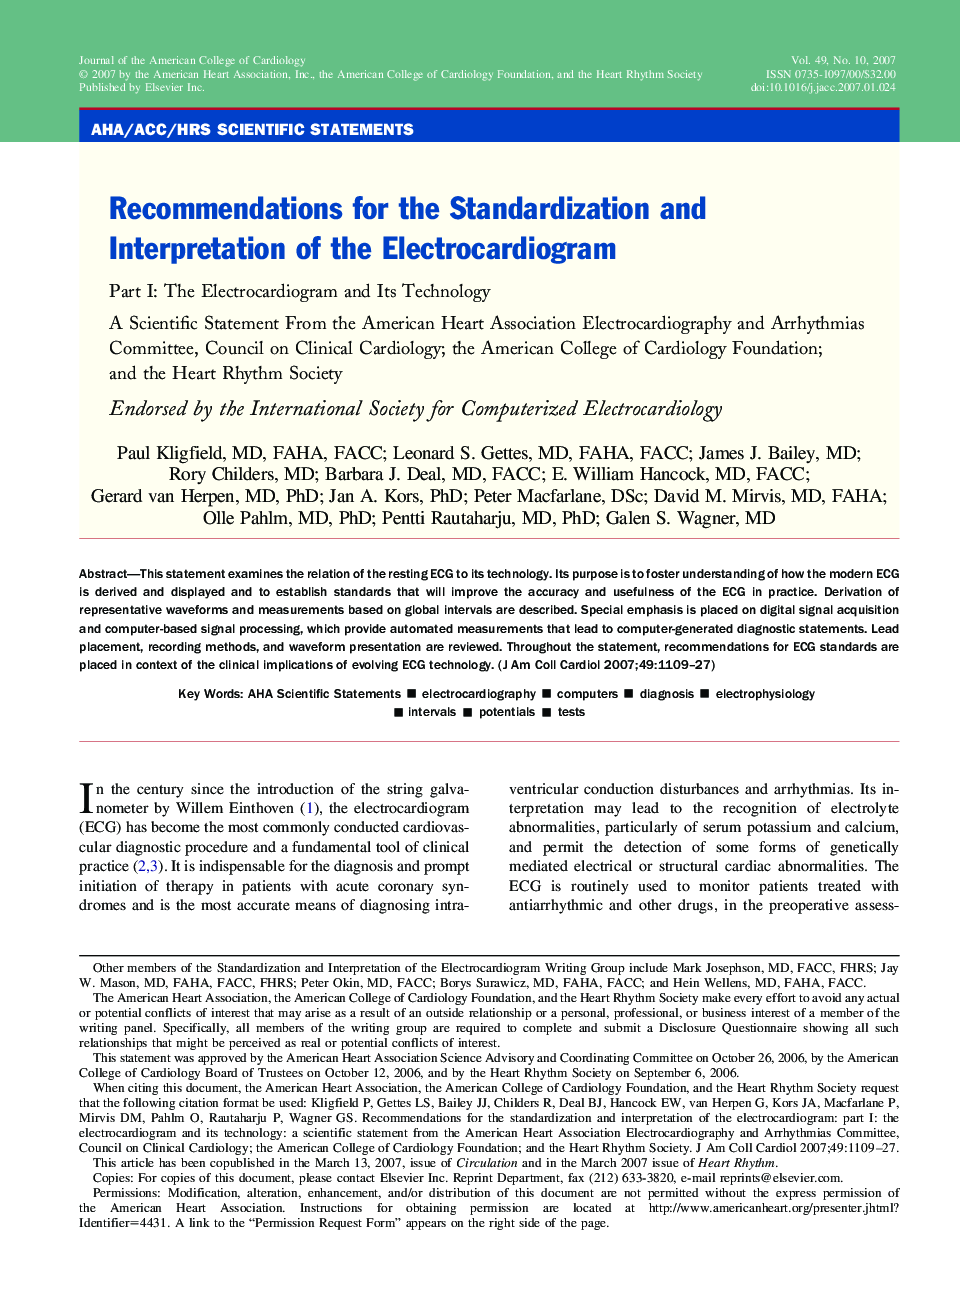 Recommendations for the Standardization and Interpretation of the Electrocardiogram : Part I: The Electrocardiogram and Its Technology A Scientific Statement From the American Heart Association Electrocardiography and Arrhythmias Committee, Council on Cli